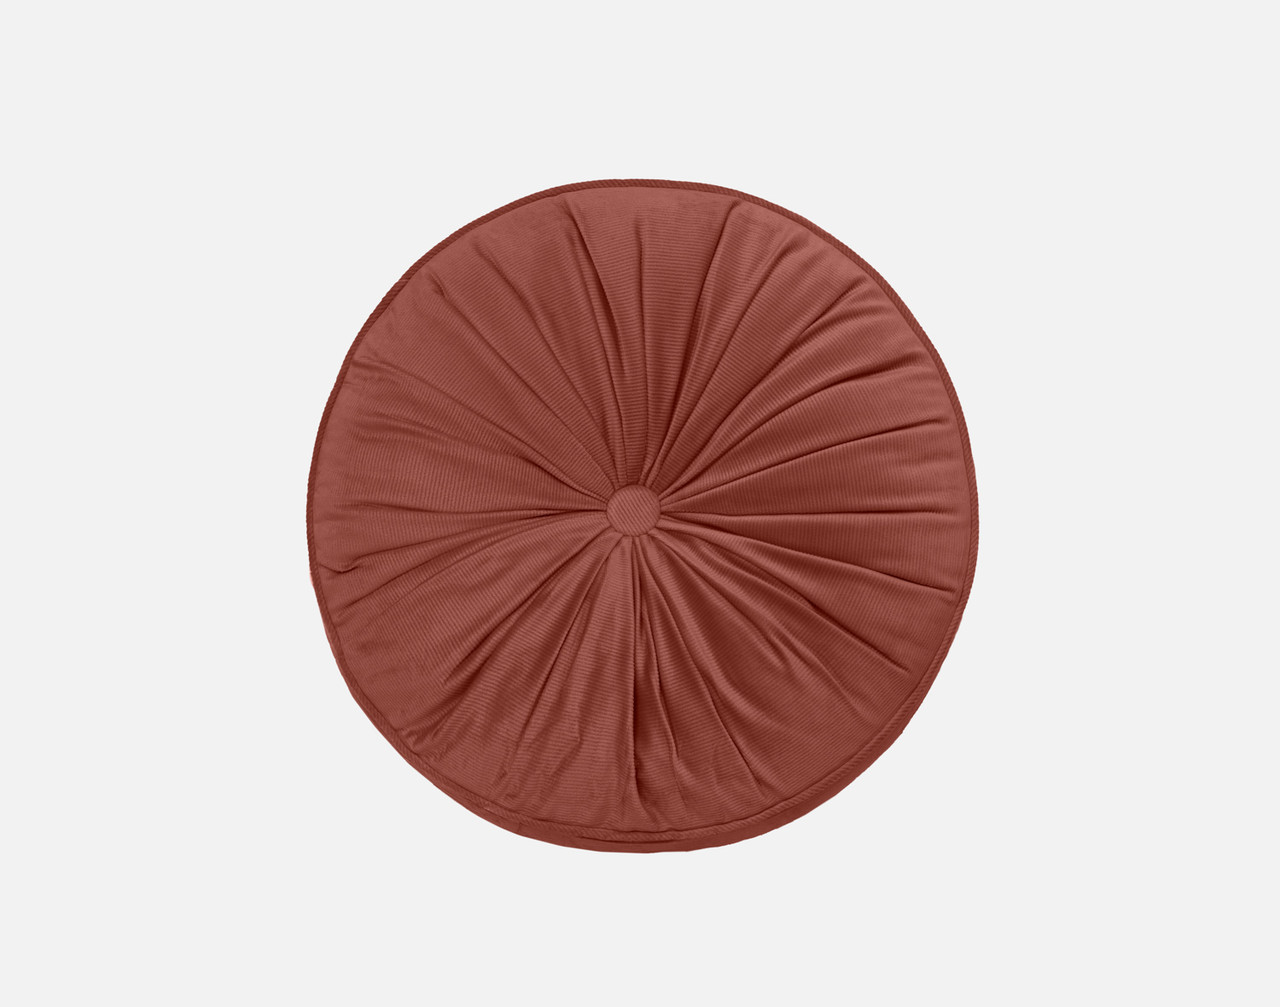 Our Round Corduroy Pillow in Clay sitting against a solid white background.